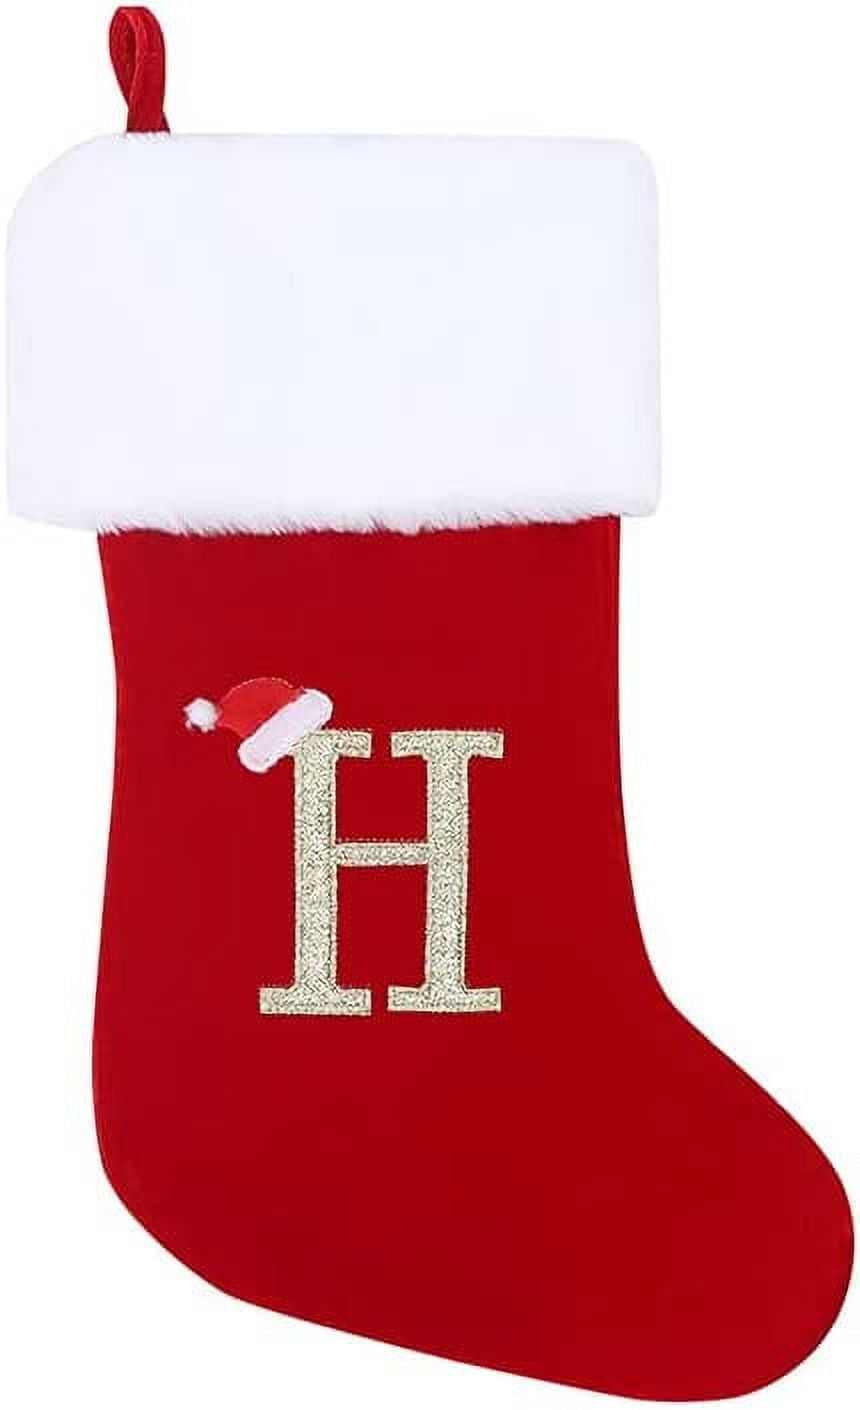 Best Choice Products 3ft Christmas Stocking Stand, Hanging Holiday Decor Display w/ Name Tags, Chalk Marker